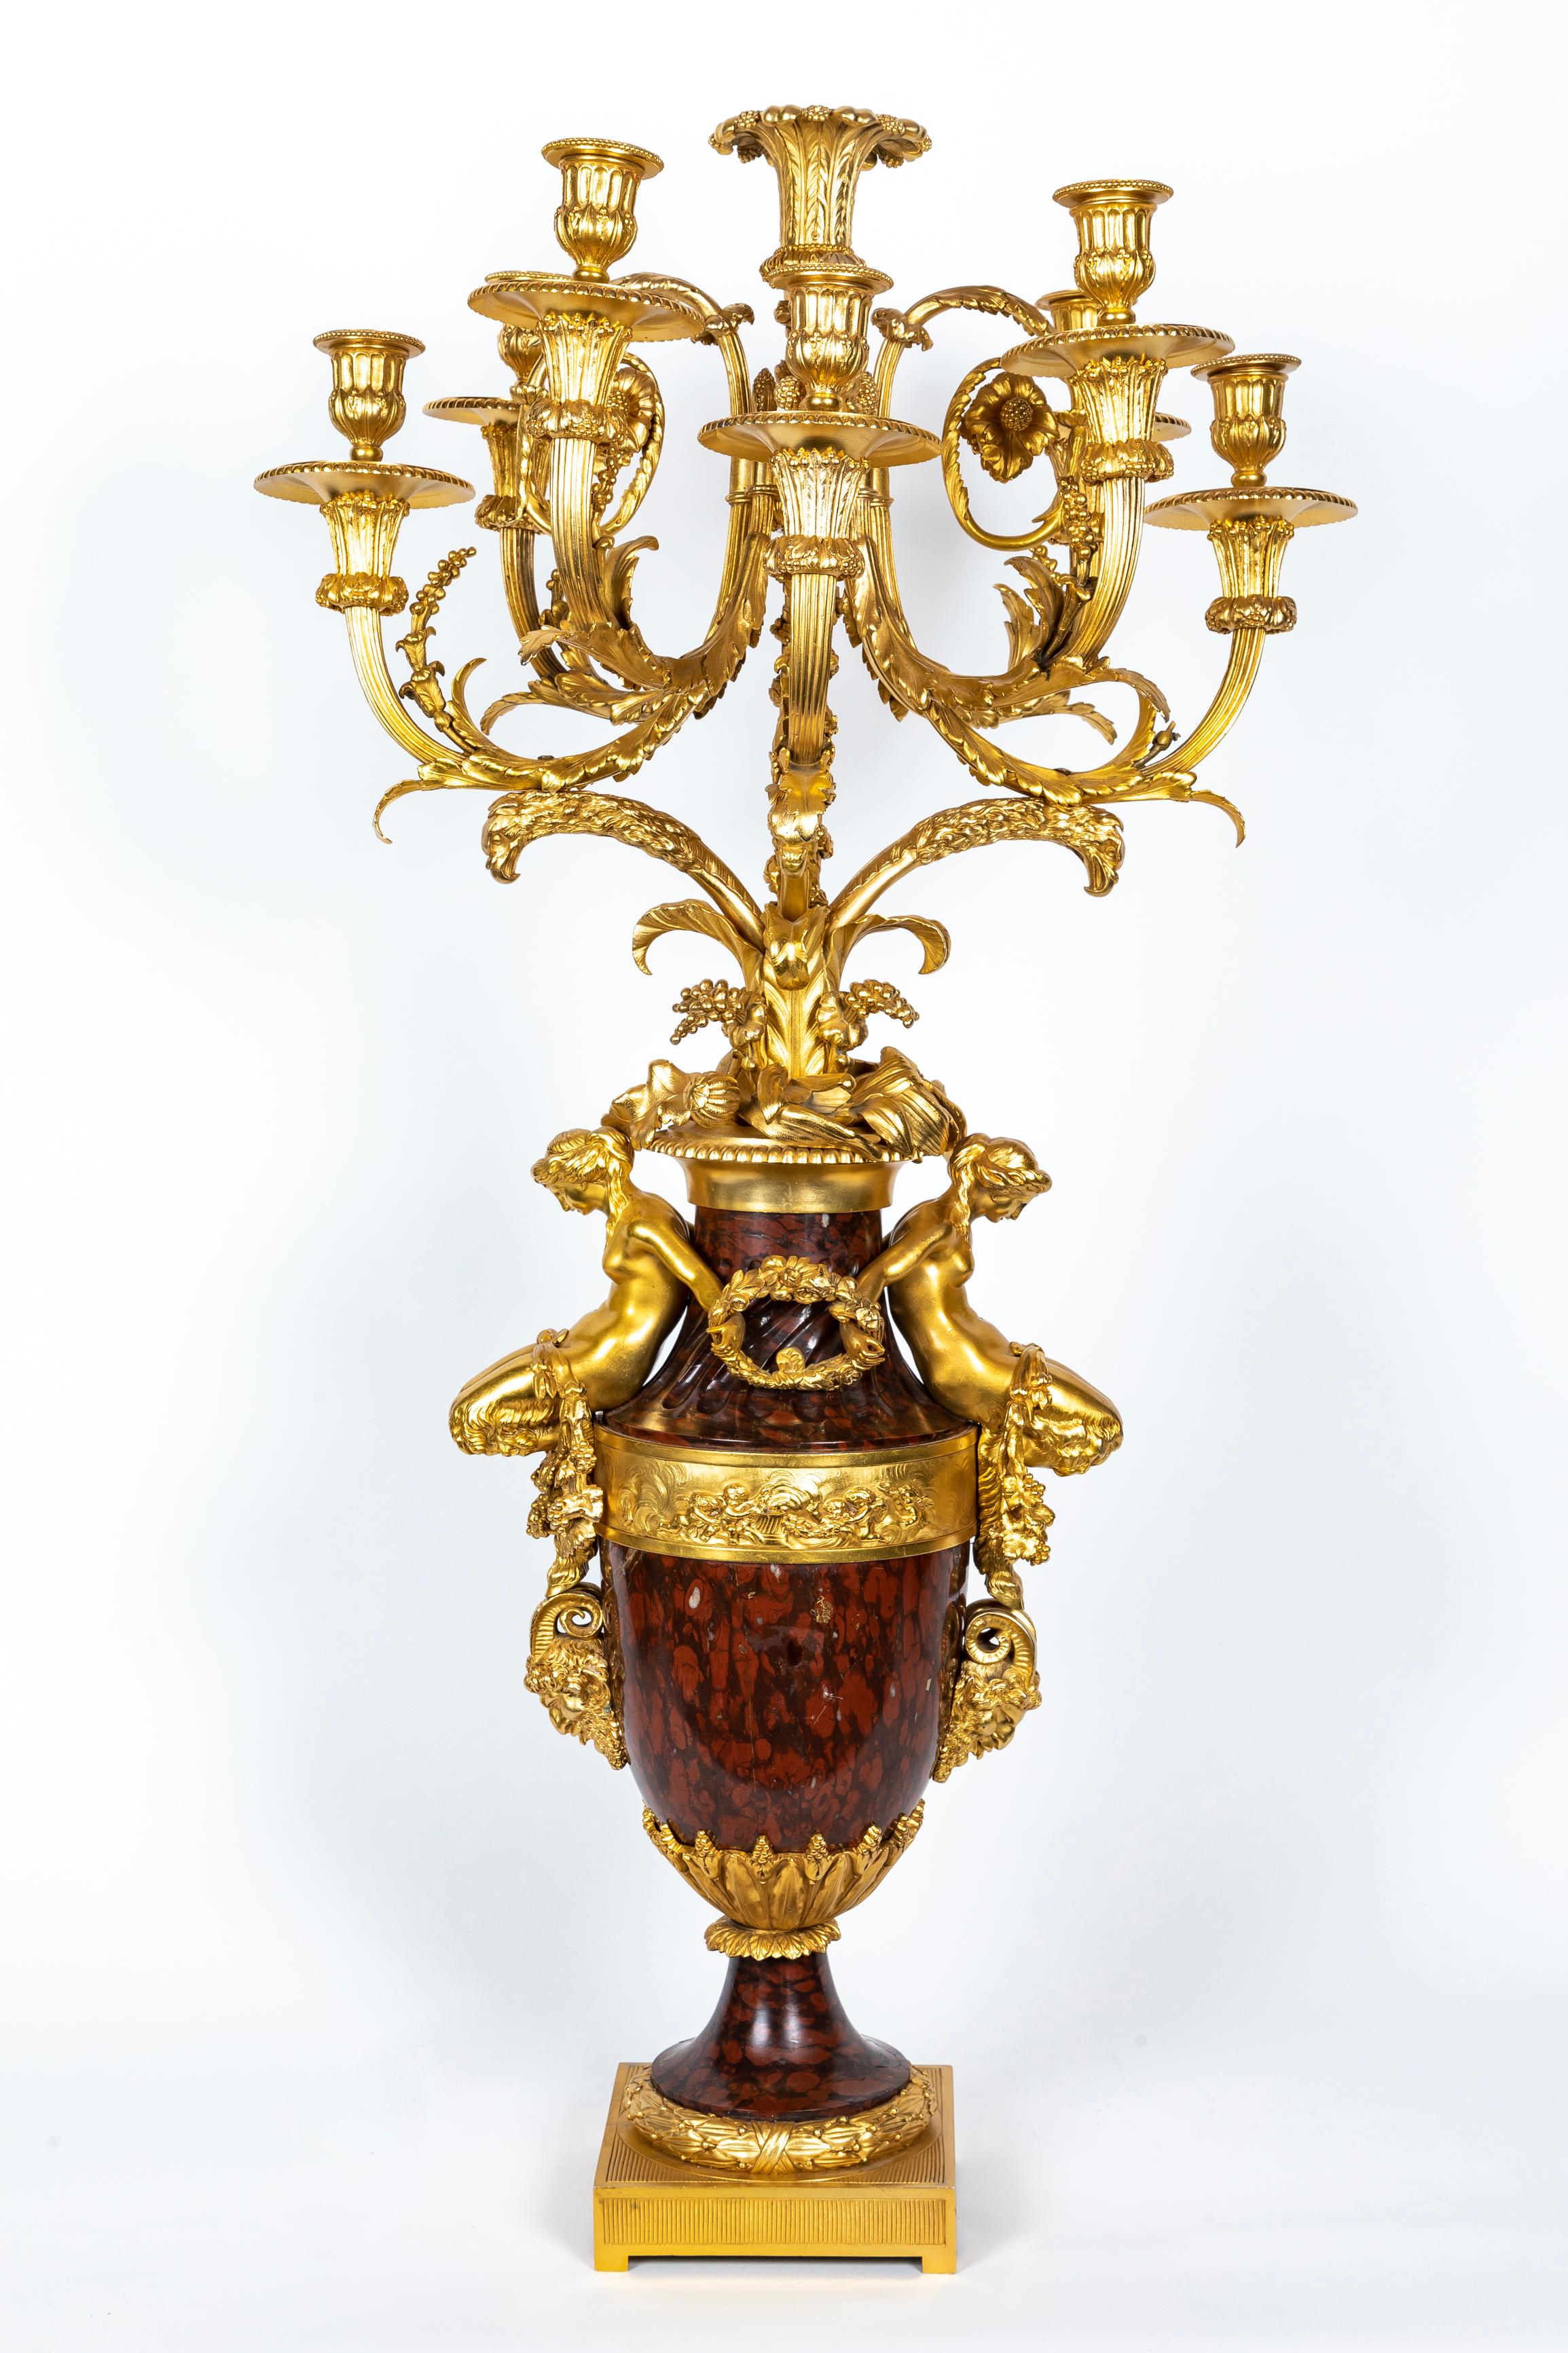 A Pair of Large Antique French Louis XVI Gilt Bronze and Marble Candelabras In Good Condition For Sale In New York, NY